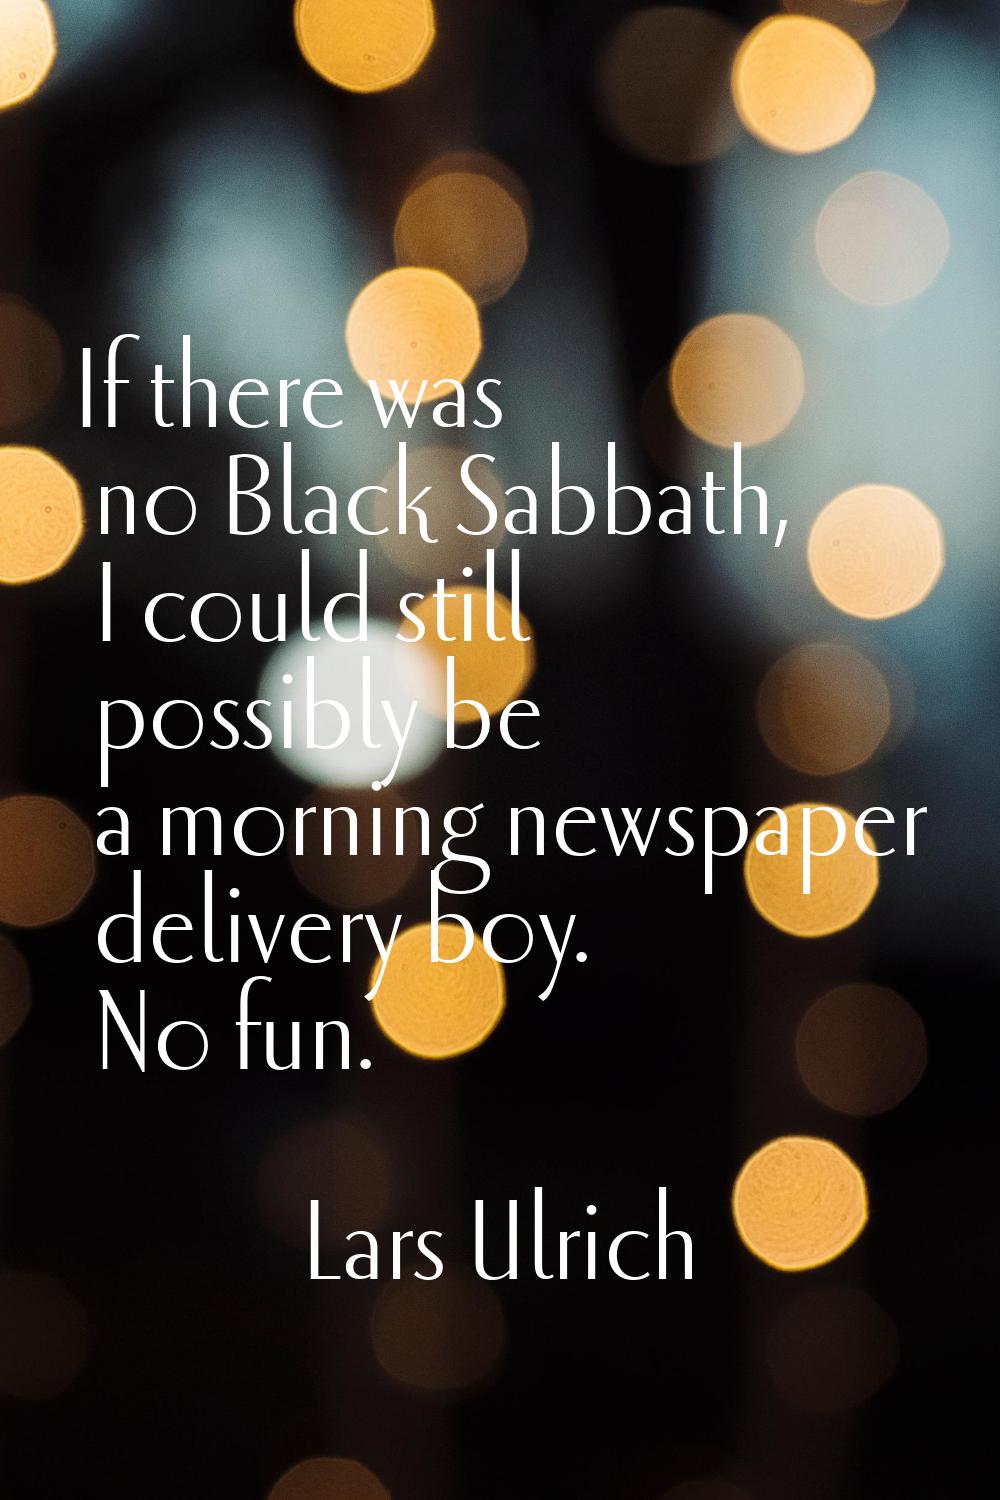 If there was no Black Sabbath, I could still possibly be a morning newspaper delivery boy. No fun.